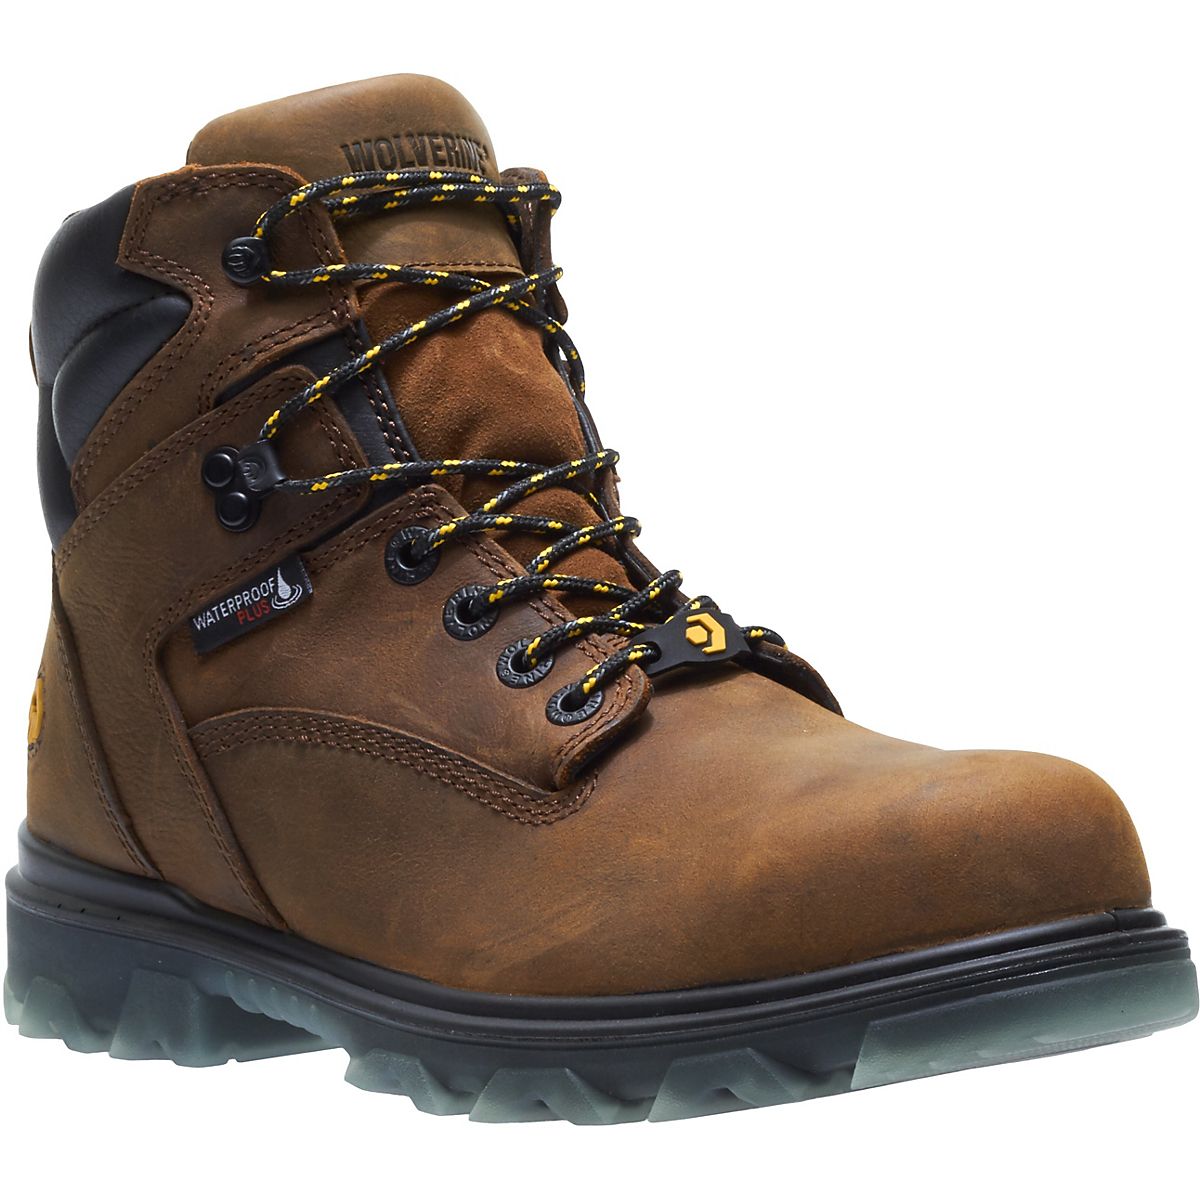 Wolverine Men's I-90 EPX CarbonMax Composite Toe Lace Up Work Boots ...